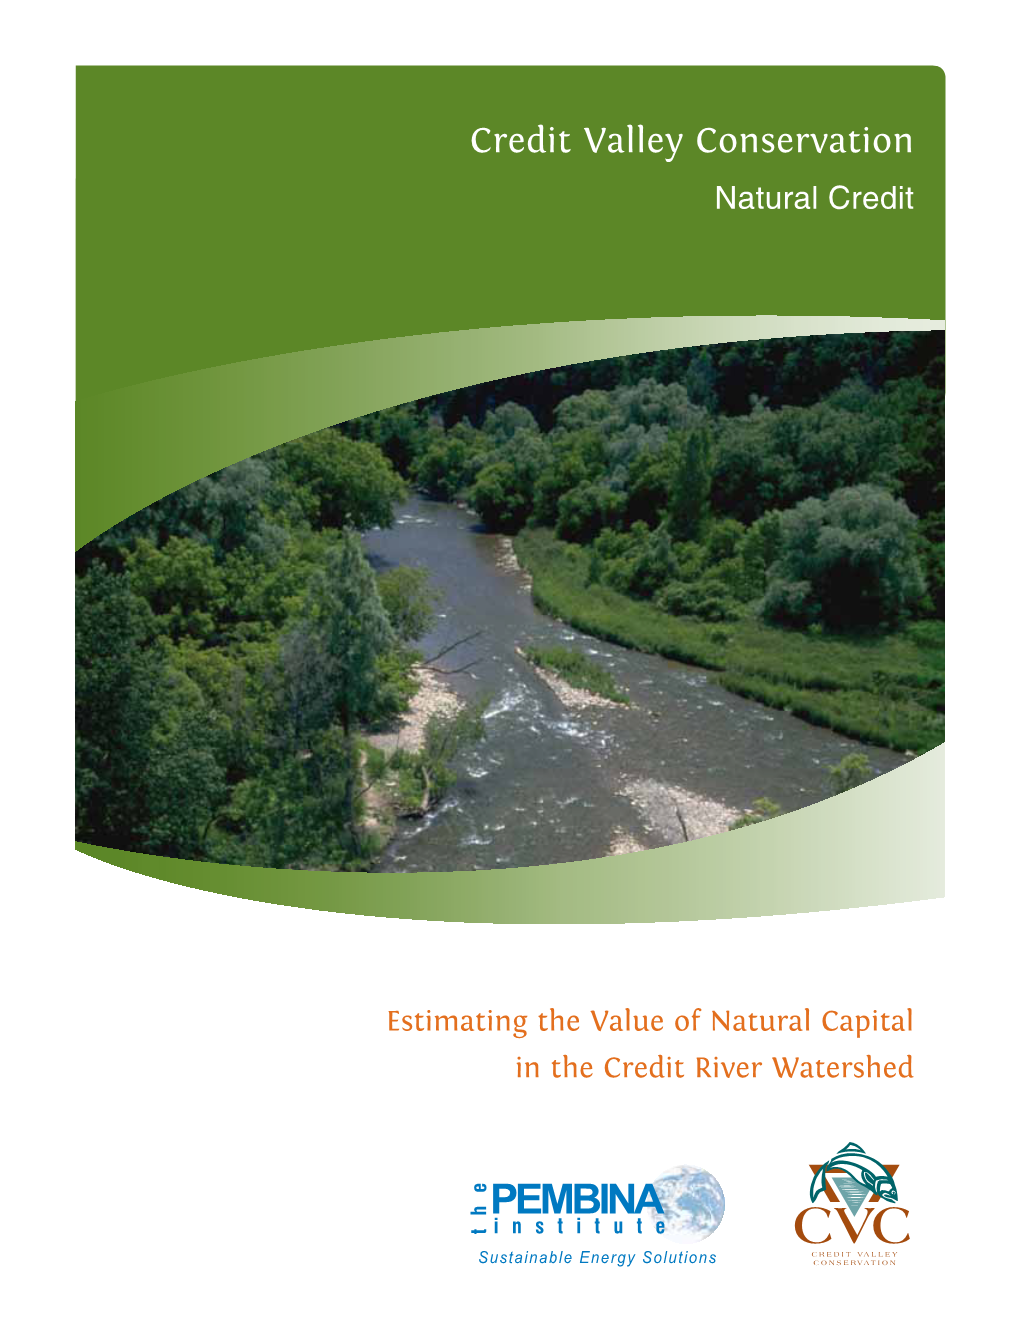 Estimating the Value of Natural Capital in the Credit River Watershed Estimating the Value of Natural Capital in the Credit River Watershed